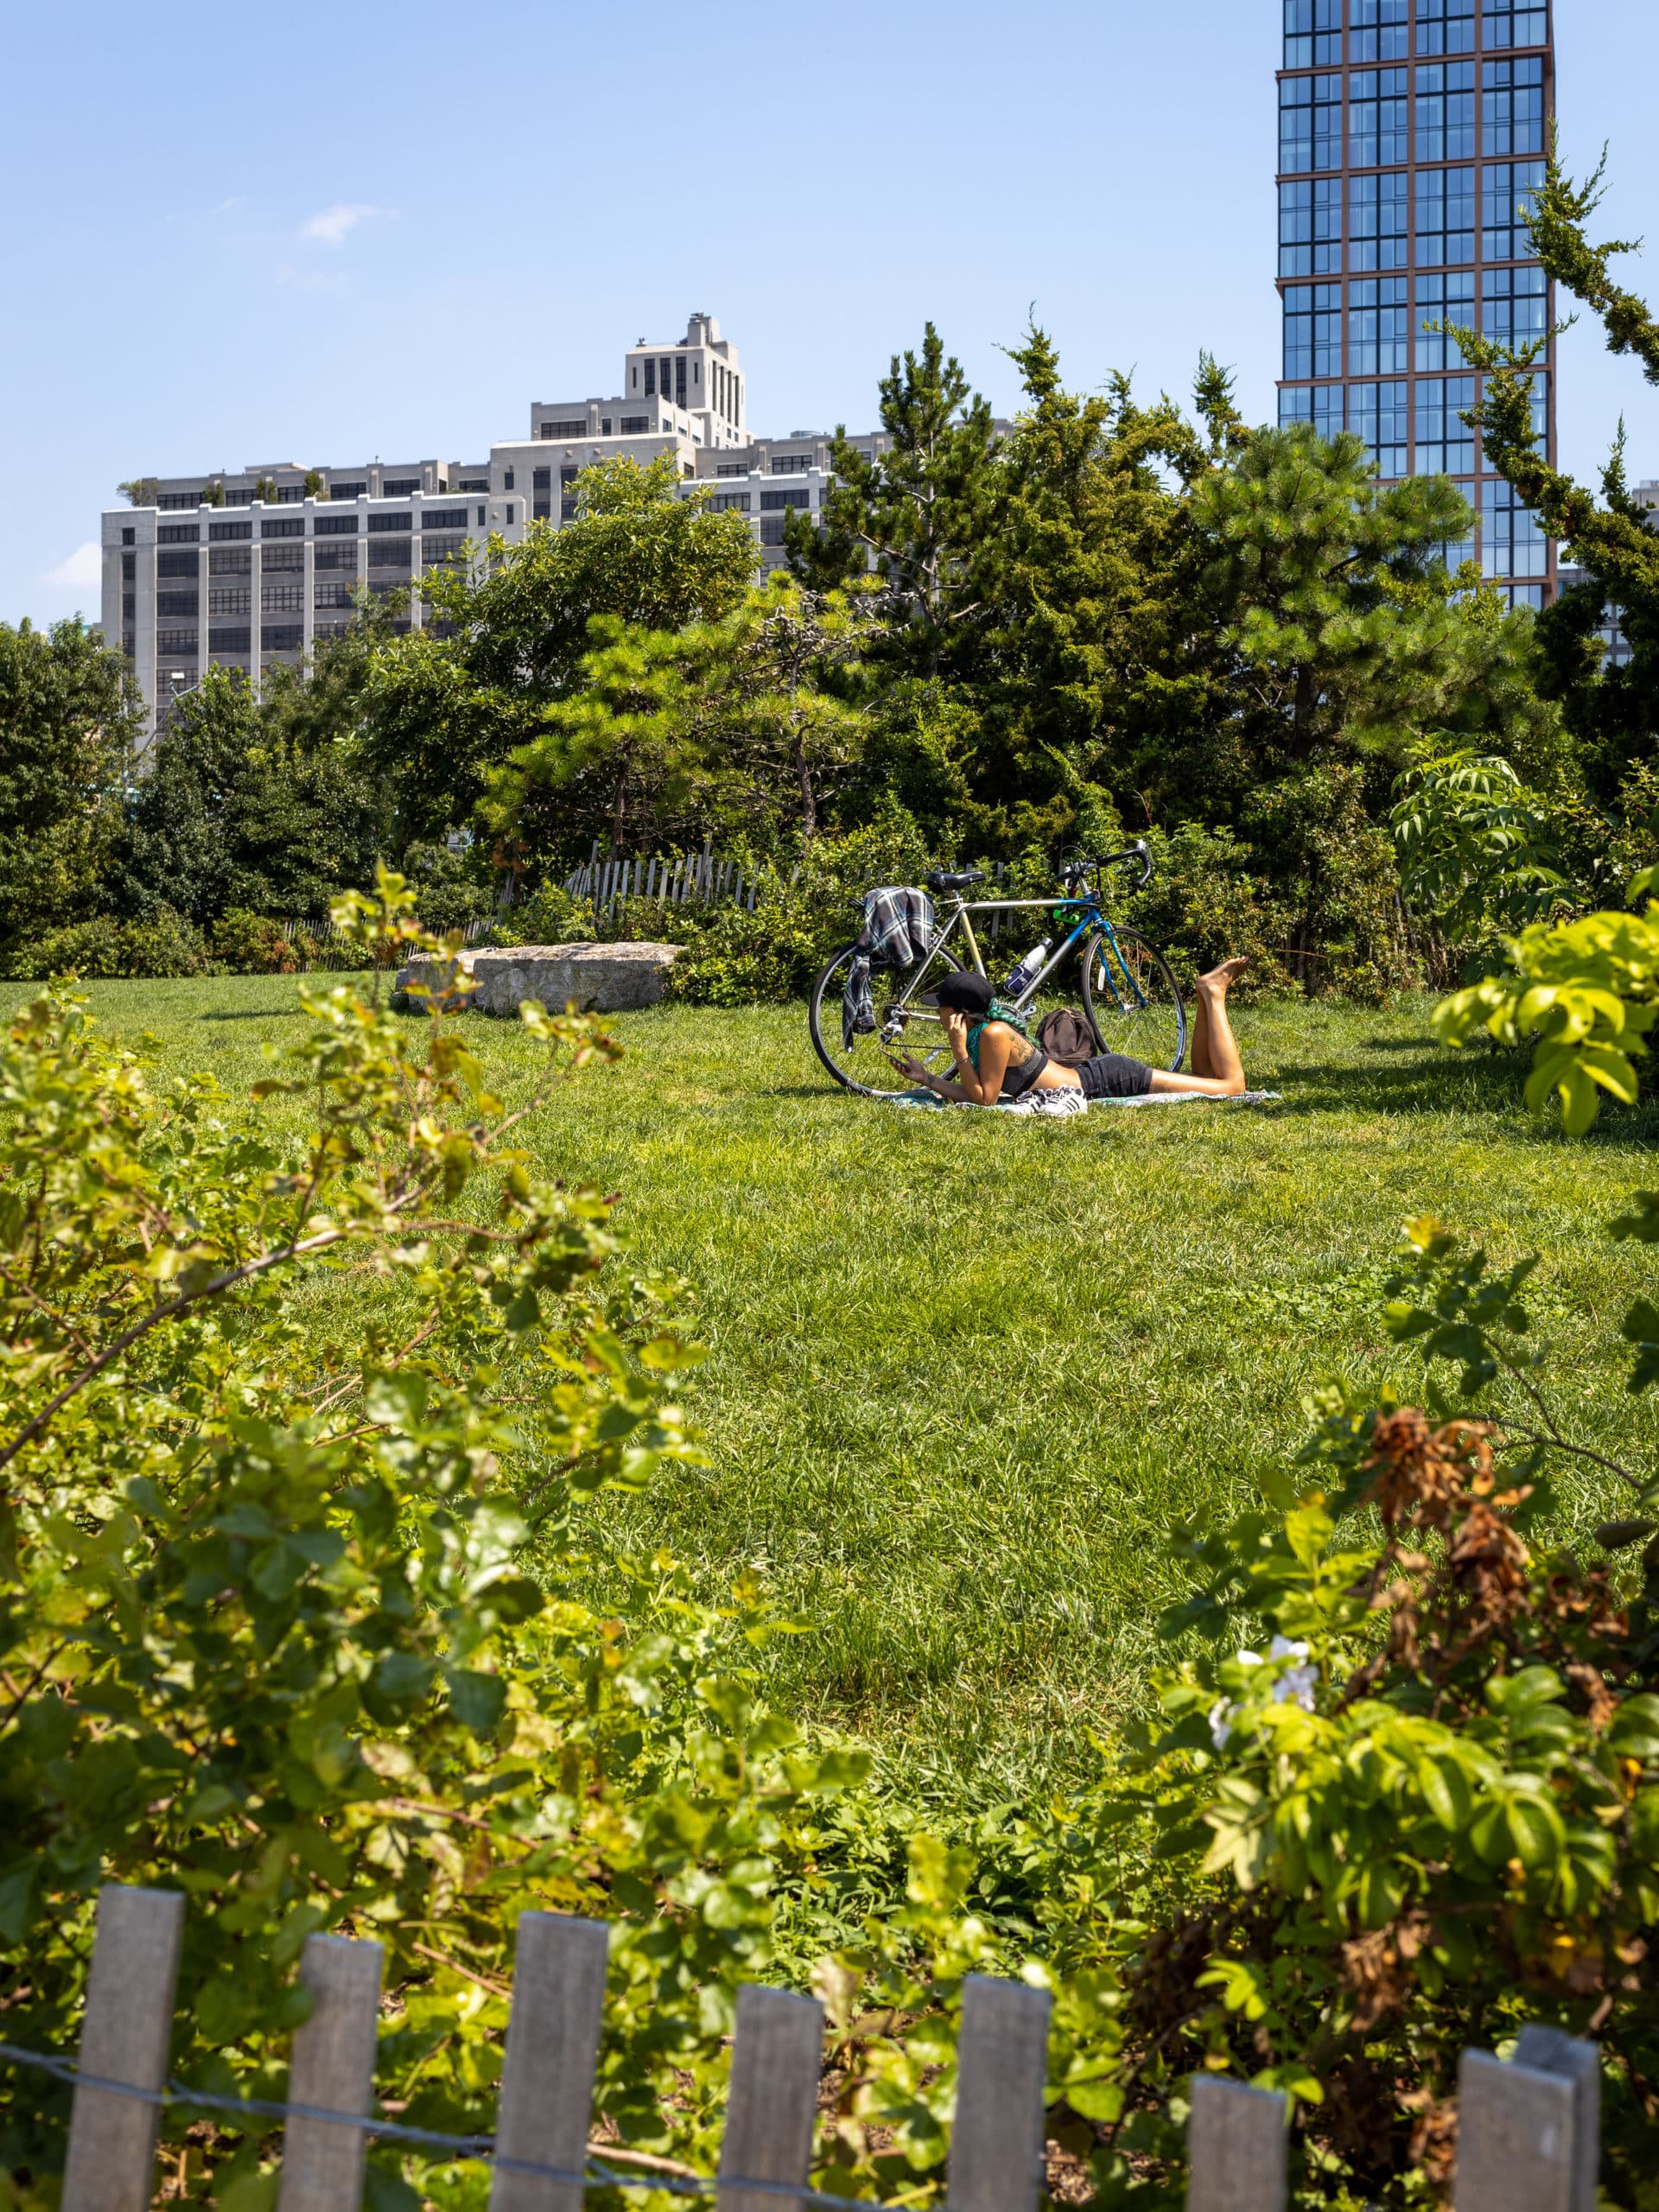 Person lying on grass next to bike, surrounded by trees and bushes on a sunny day.